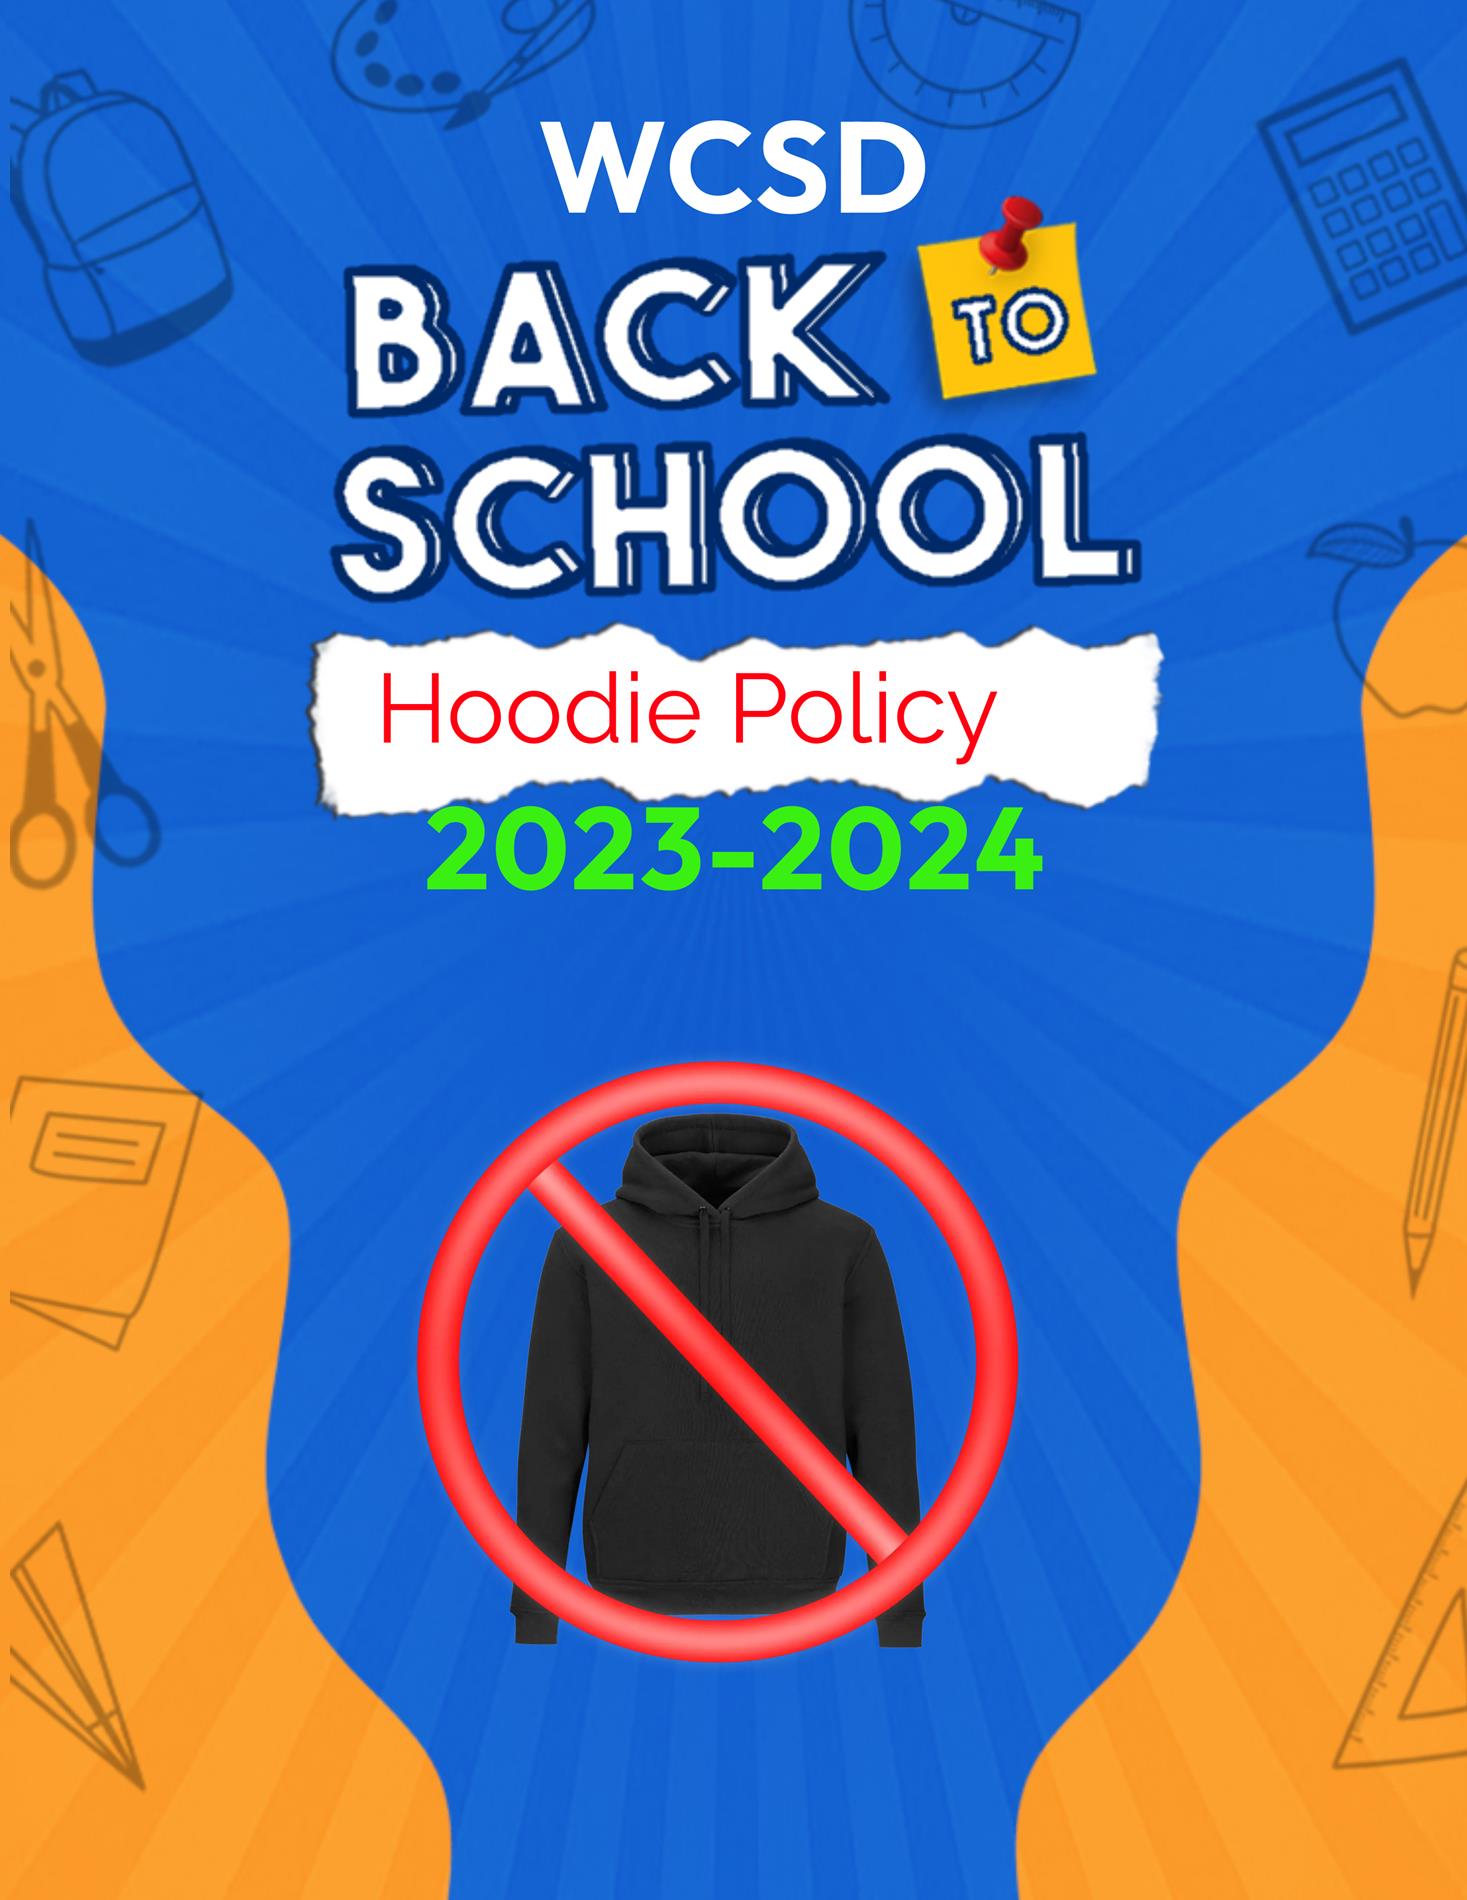 WCSD Back to School Hoodie Policy